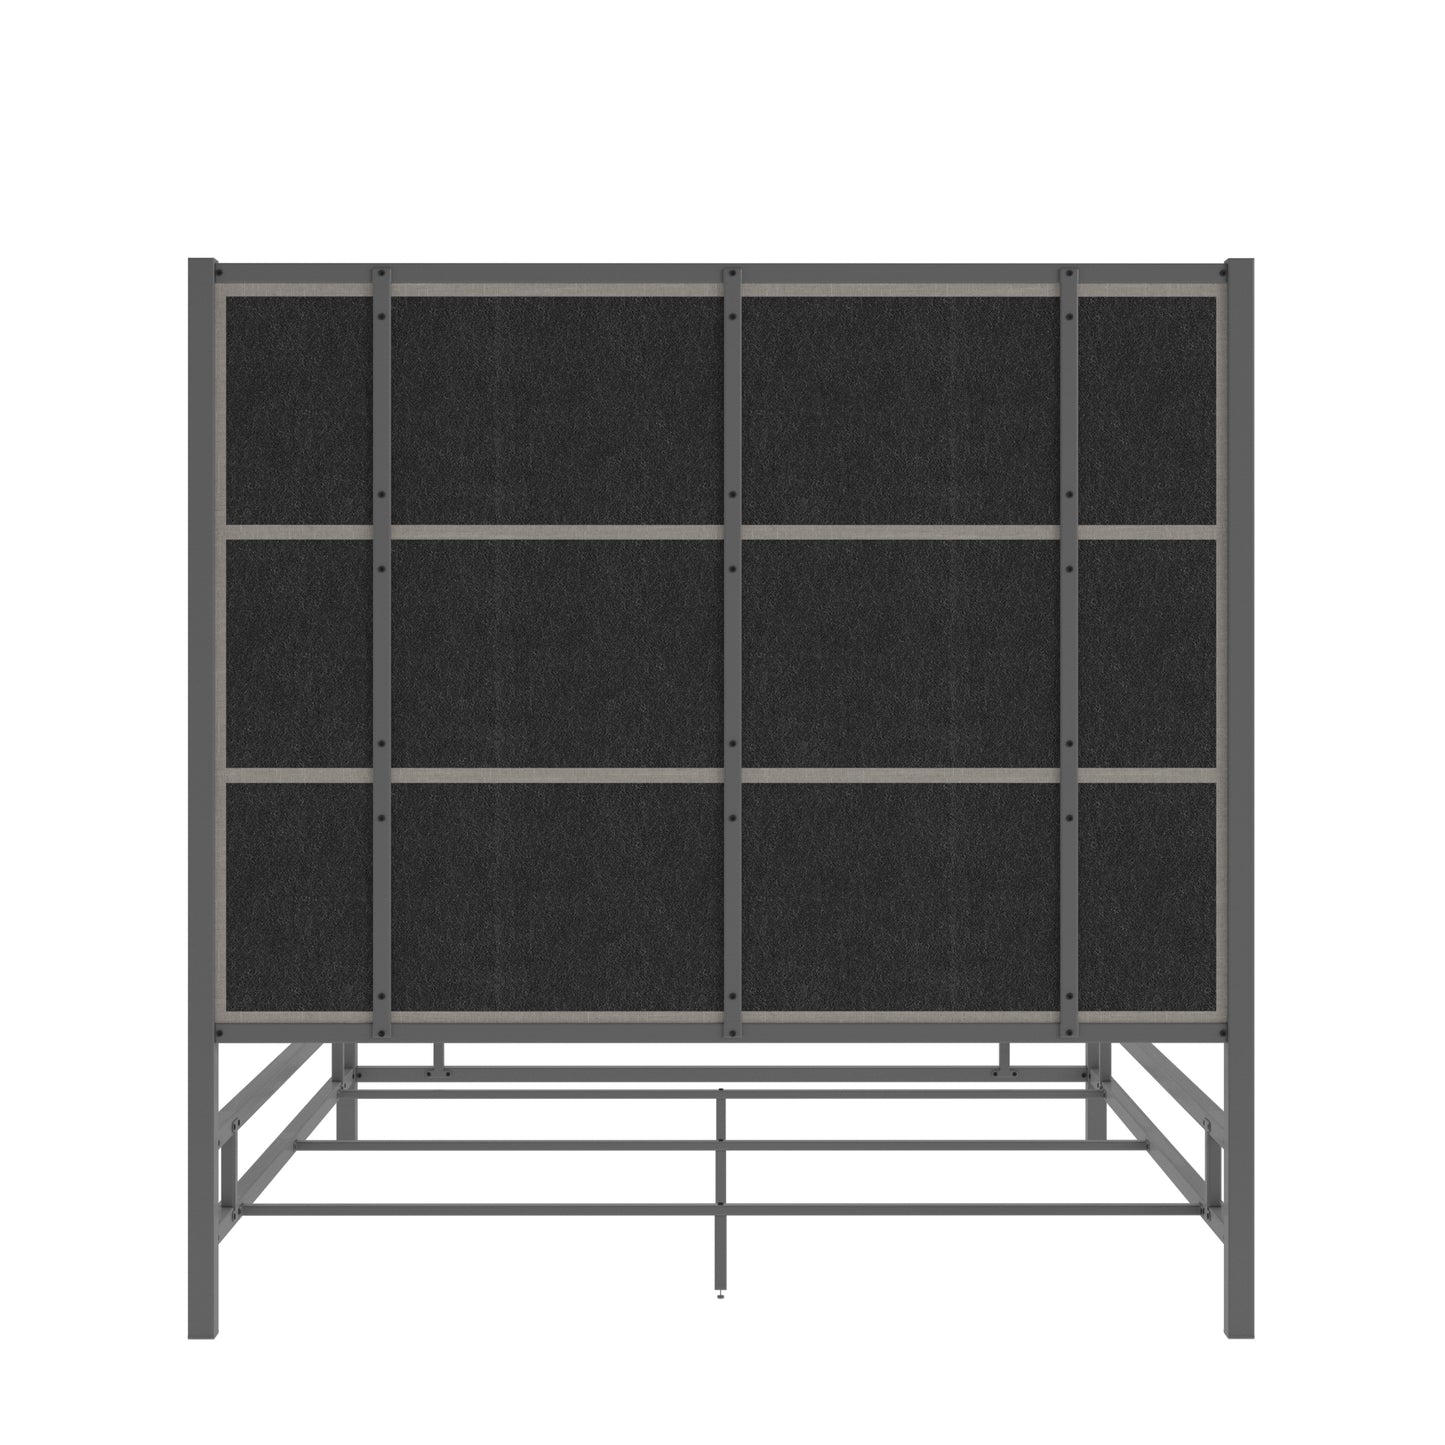 Metal Canopy Bed with Linen Panel Headboard - Grey Linen, Black Nickel Finish, King Size